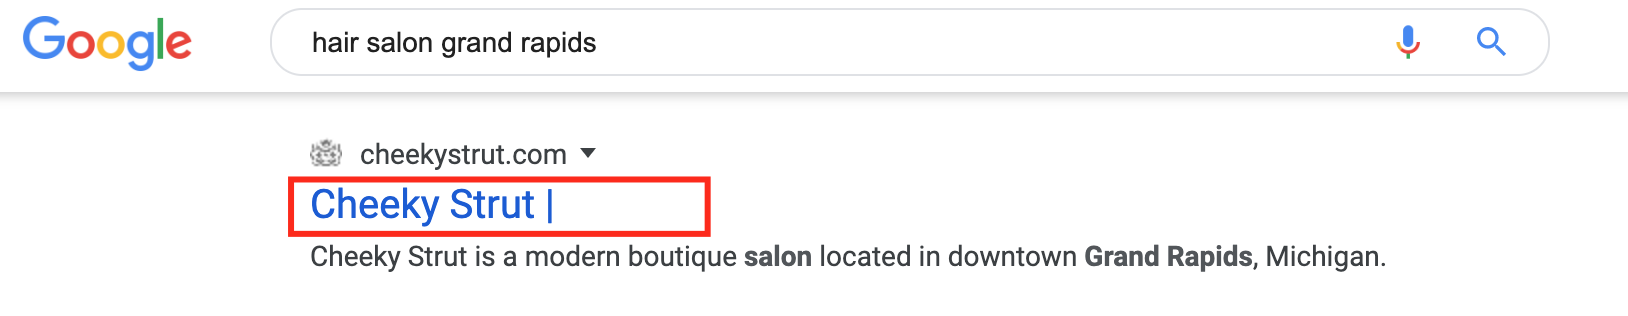 page title for hair salon